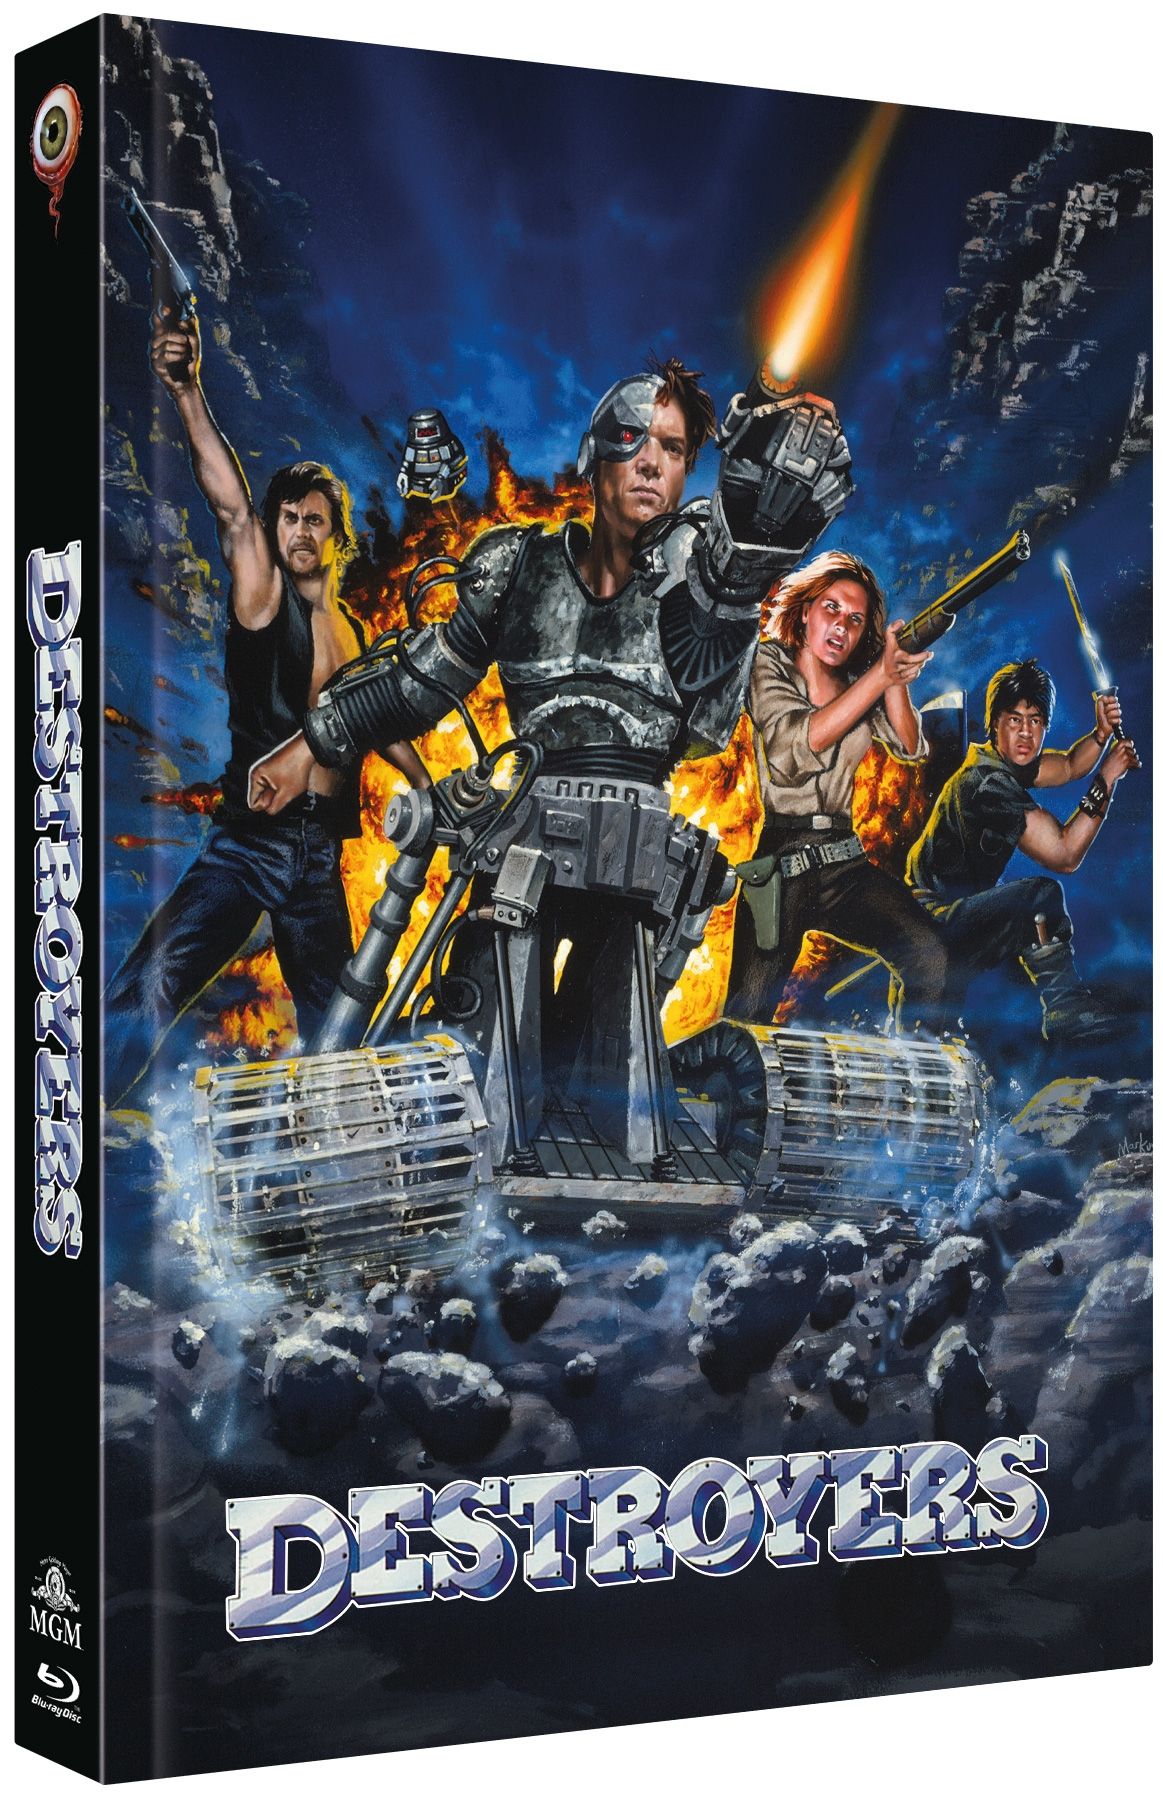 Destroyers (Lim. Uncut Mediabook - Cover A) (DVD + BLURAY)